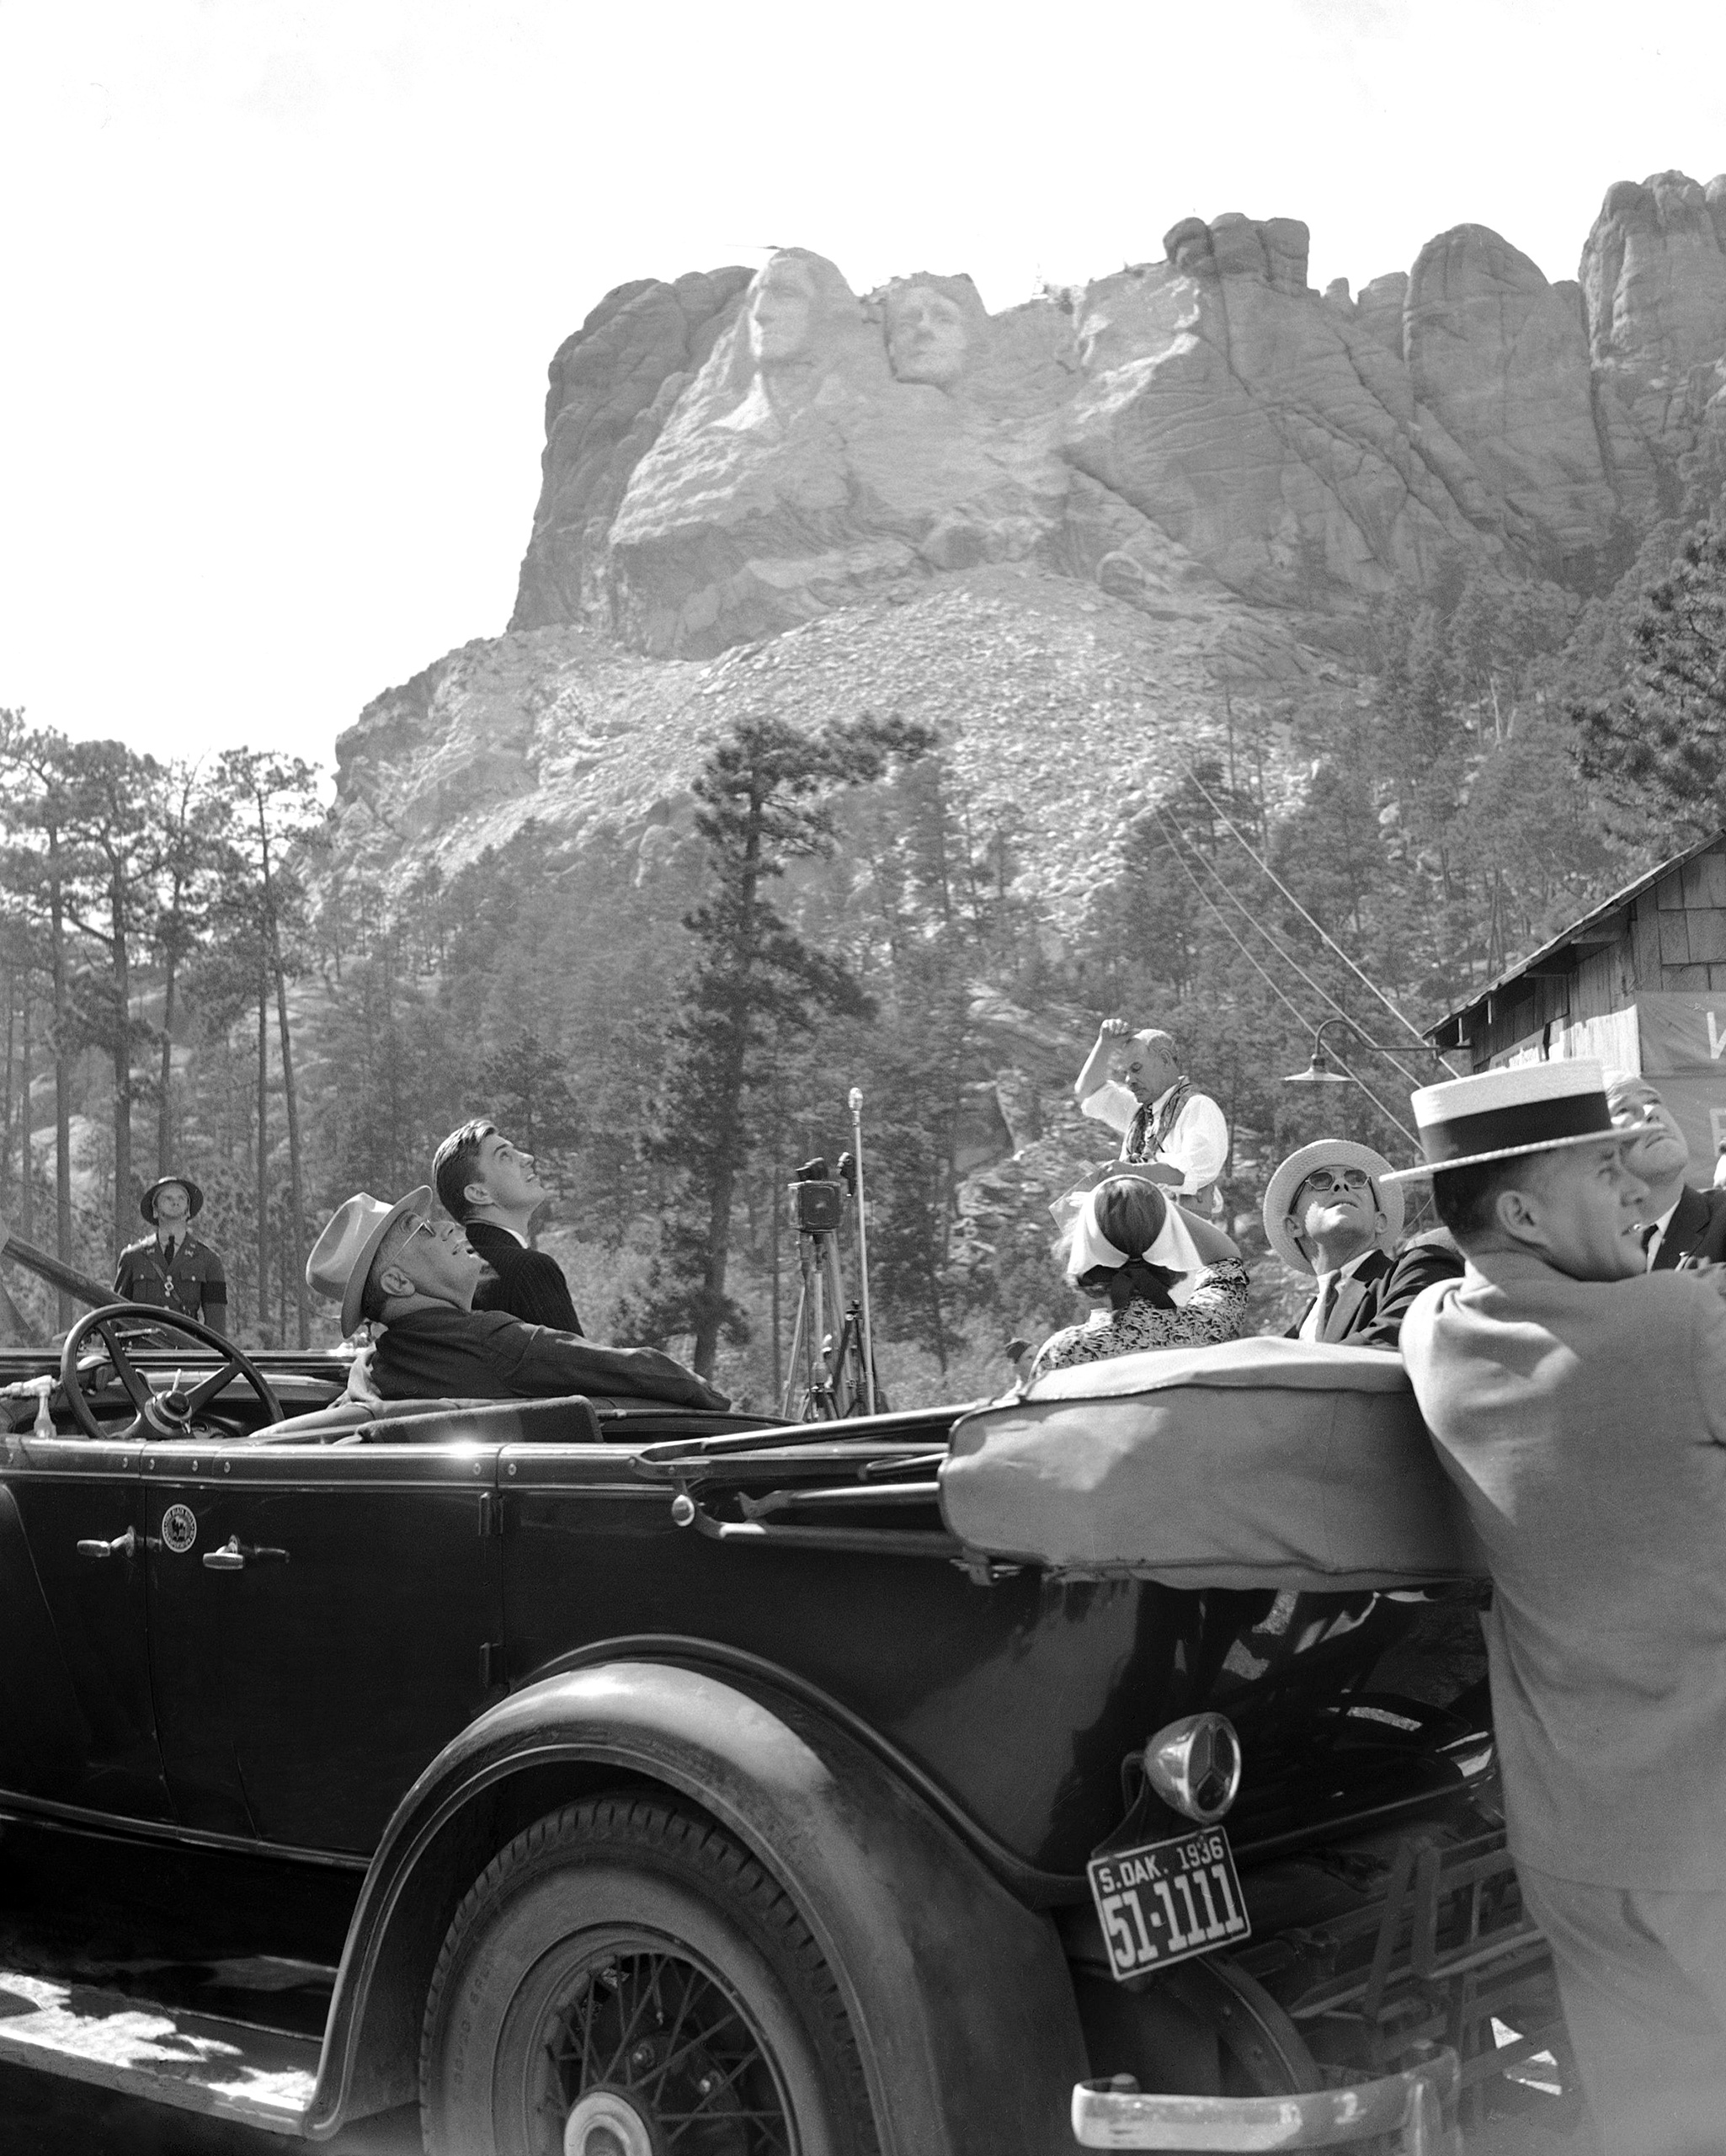 Franklin Roosevelt at Mount Rushmore in 1936.